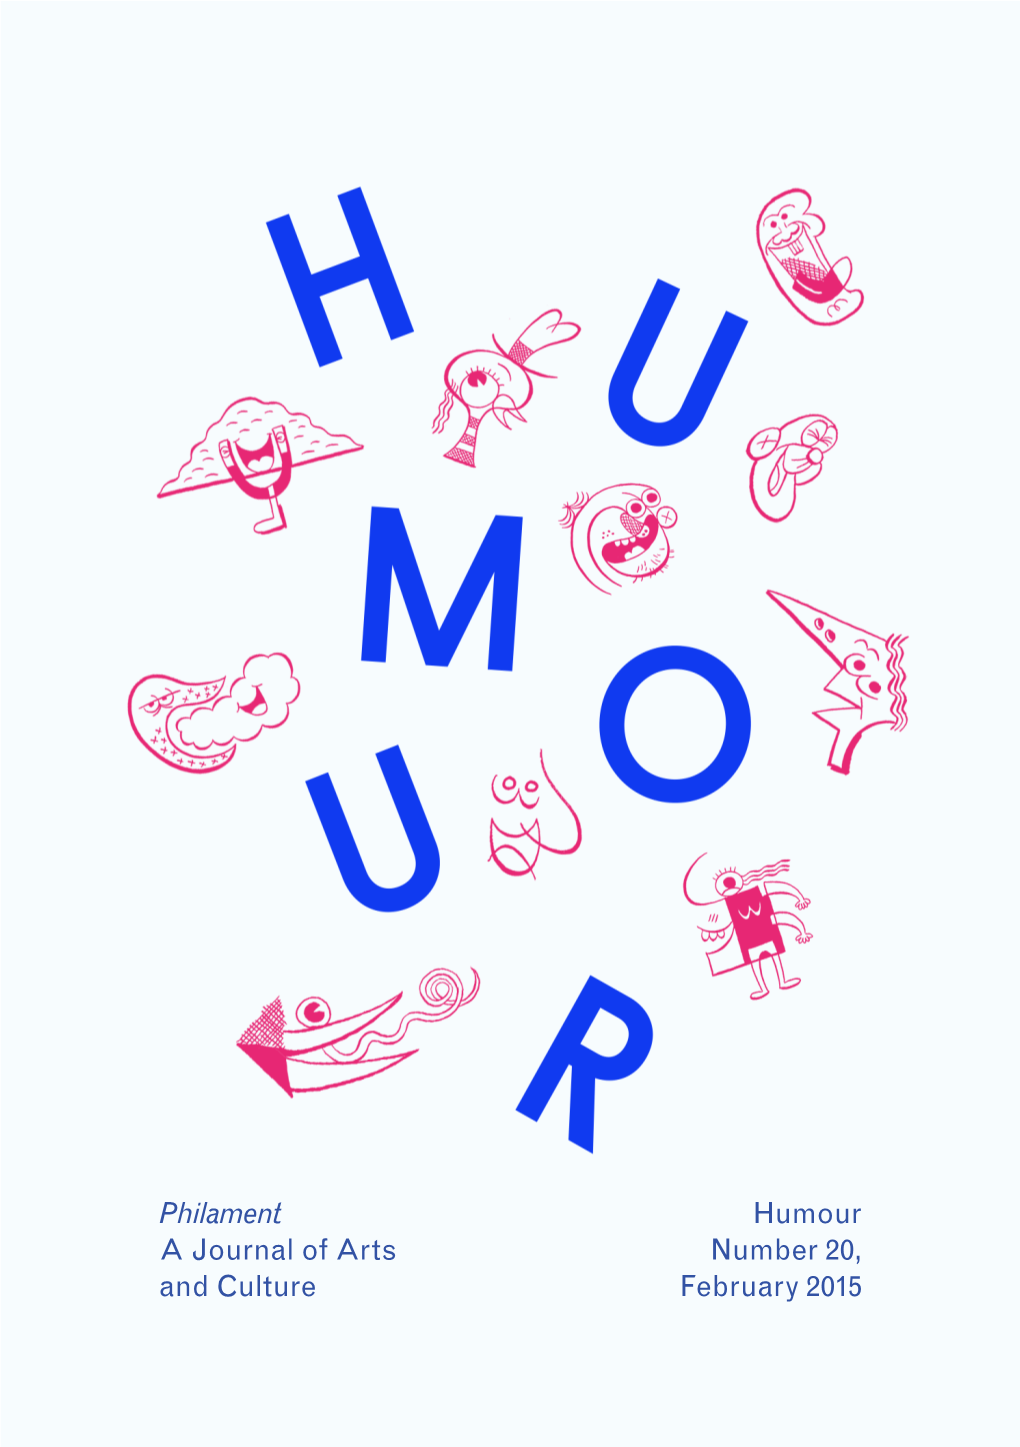 Humour Number 20, February 2015 Philament a Journal of Arts And